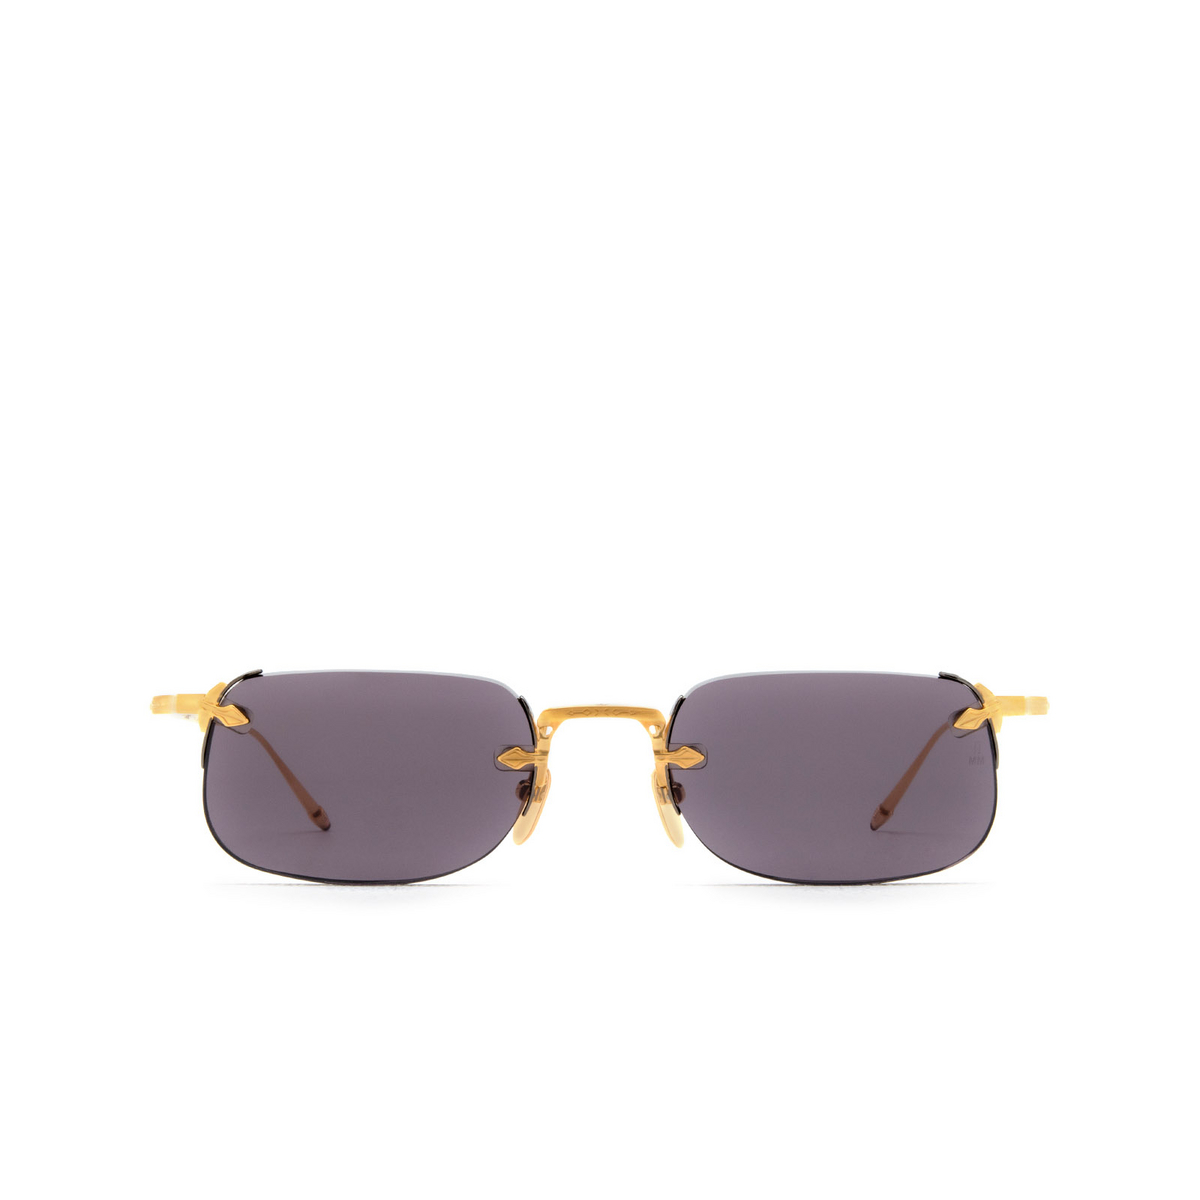 Jacques Marie Mage® Rectangle Sunglasses: Fonda color Gold - front view